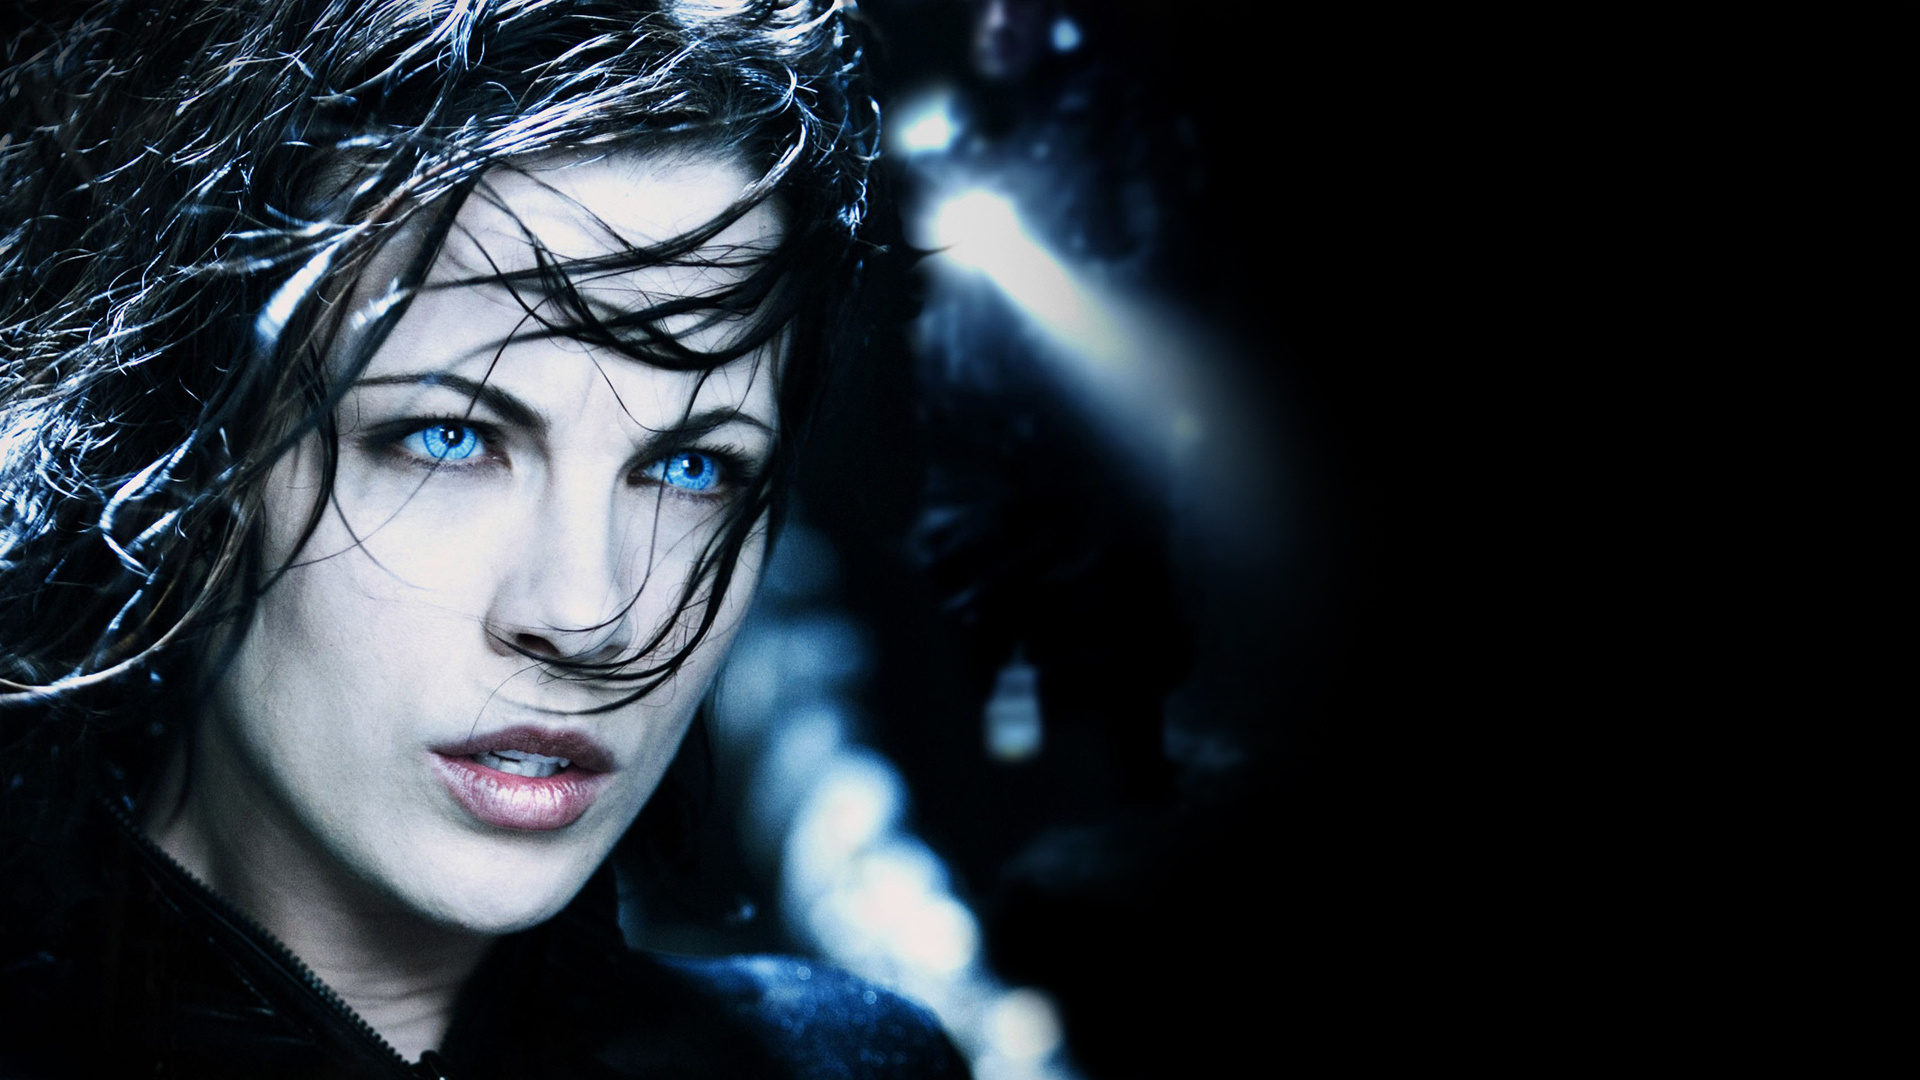 Selene (Underworld): Best known for portraying the leather-clad vampire warrior. 1920x1080 Full HD Wallpaper.